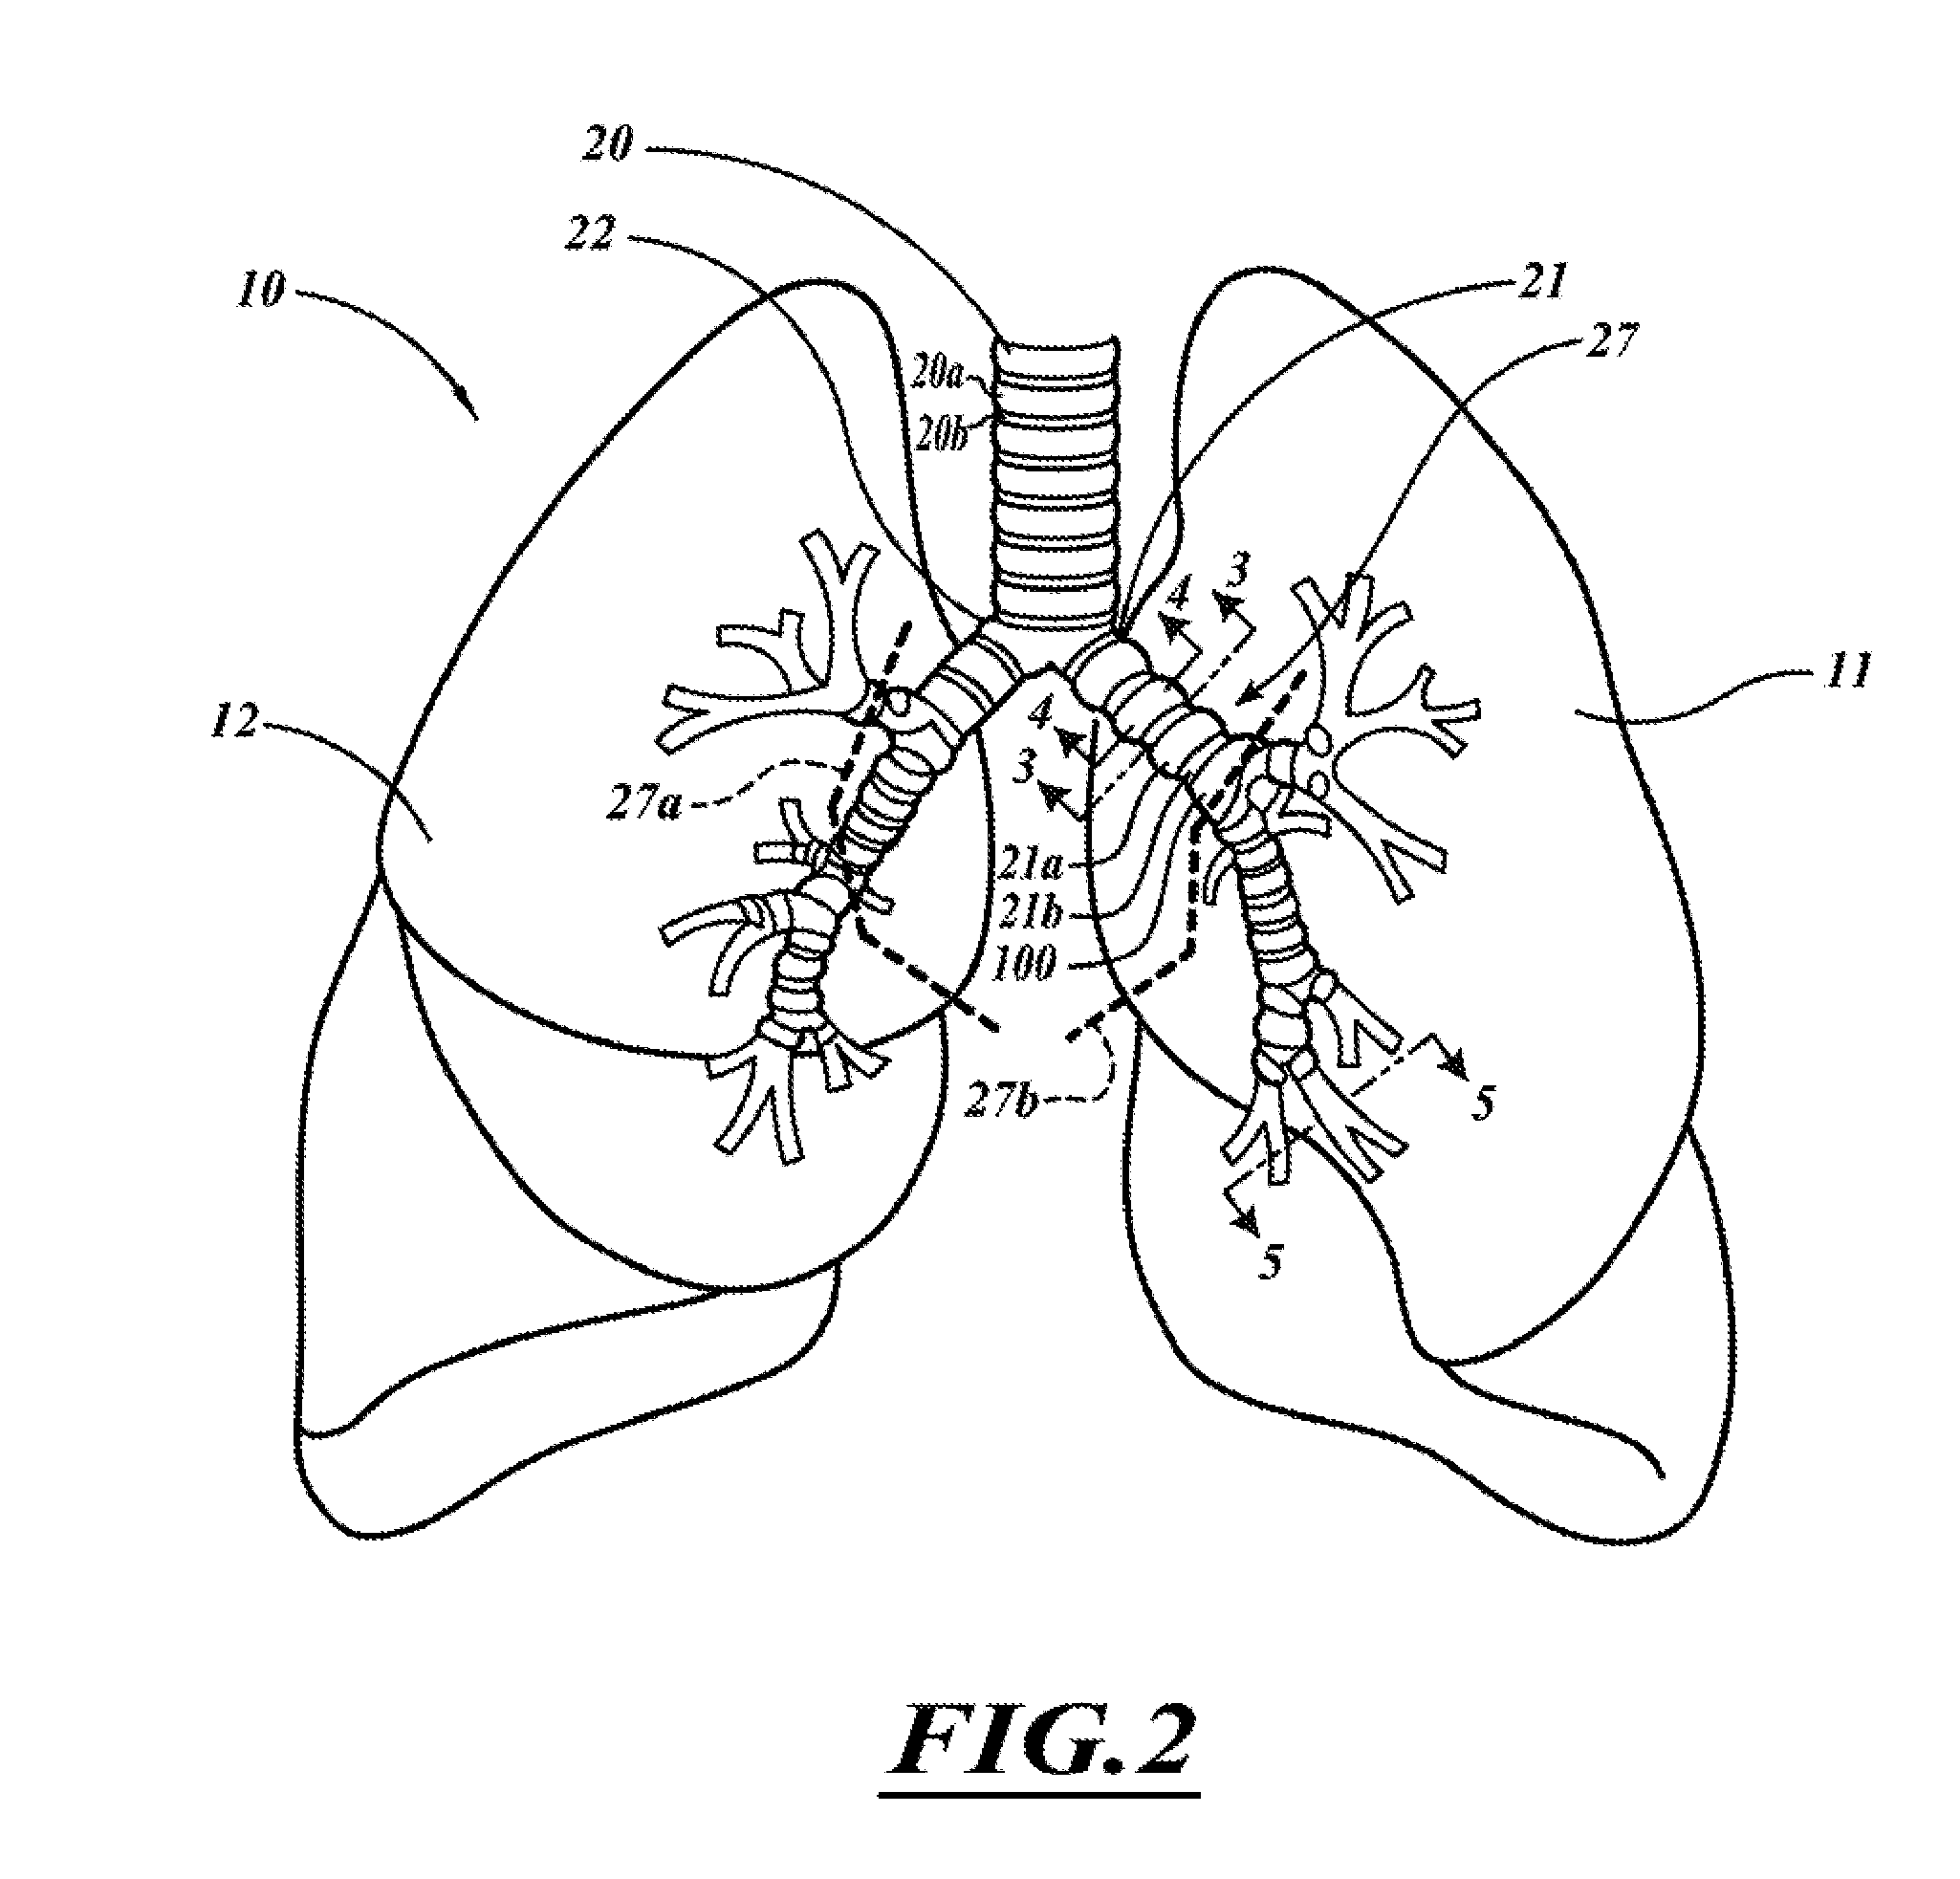 Systems, devices, and methods for treating a pulmonary disease with ultrasound energy